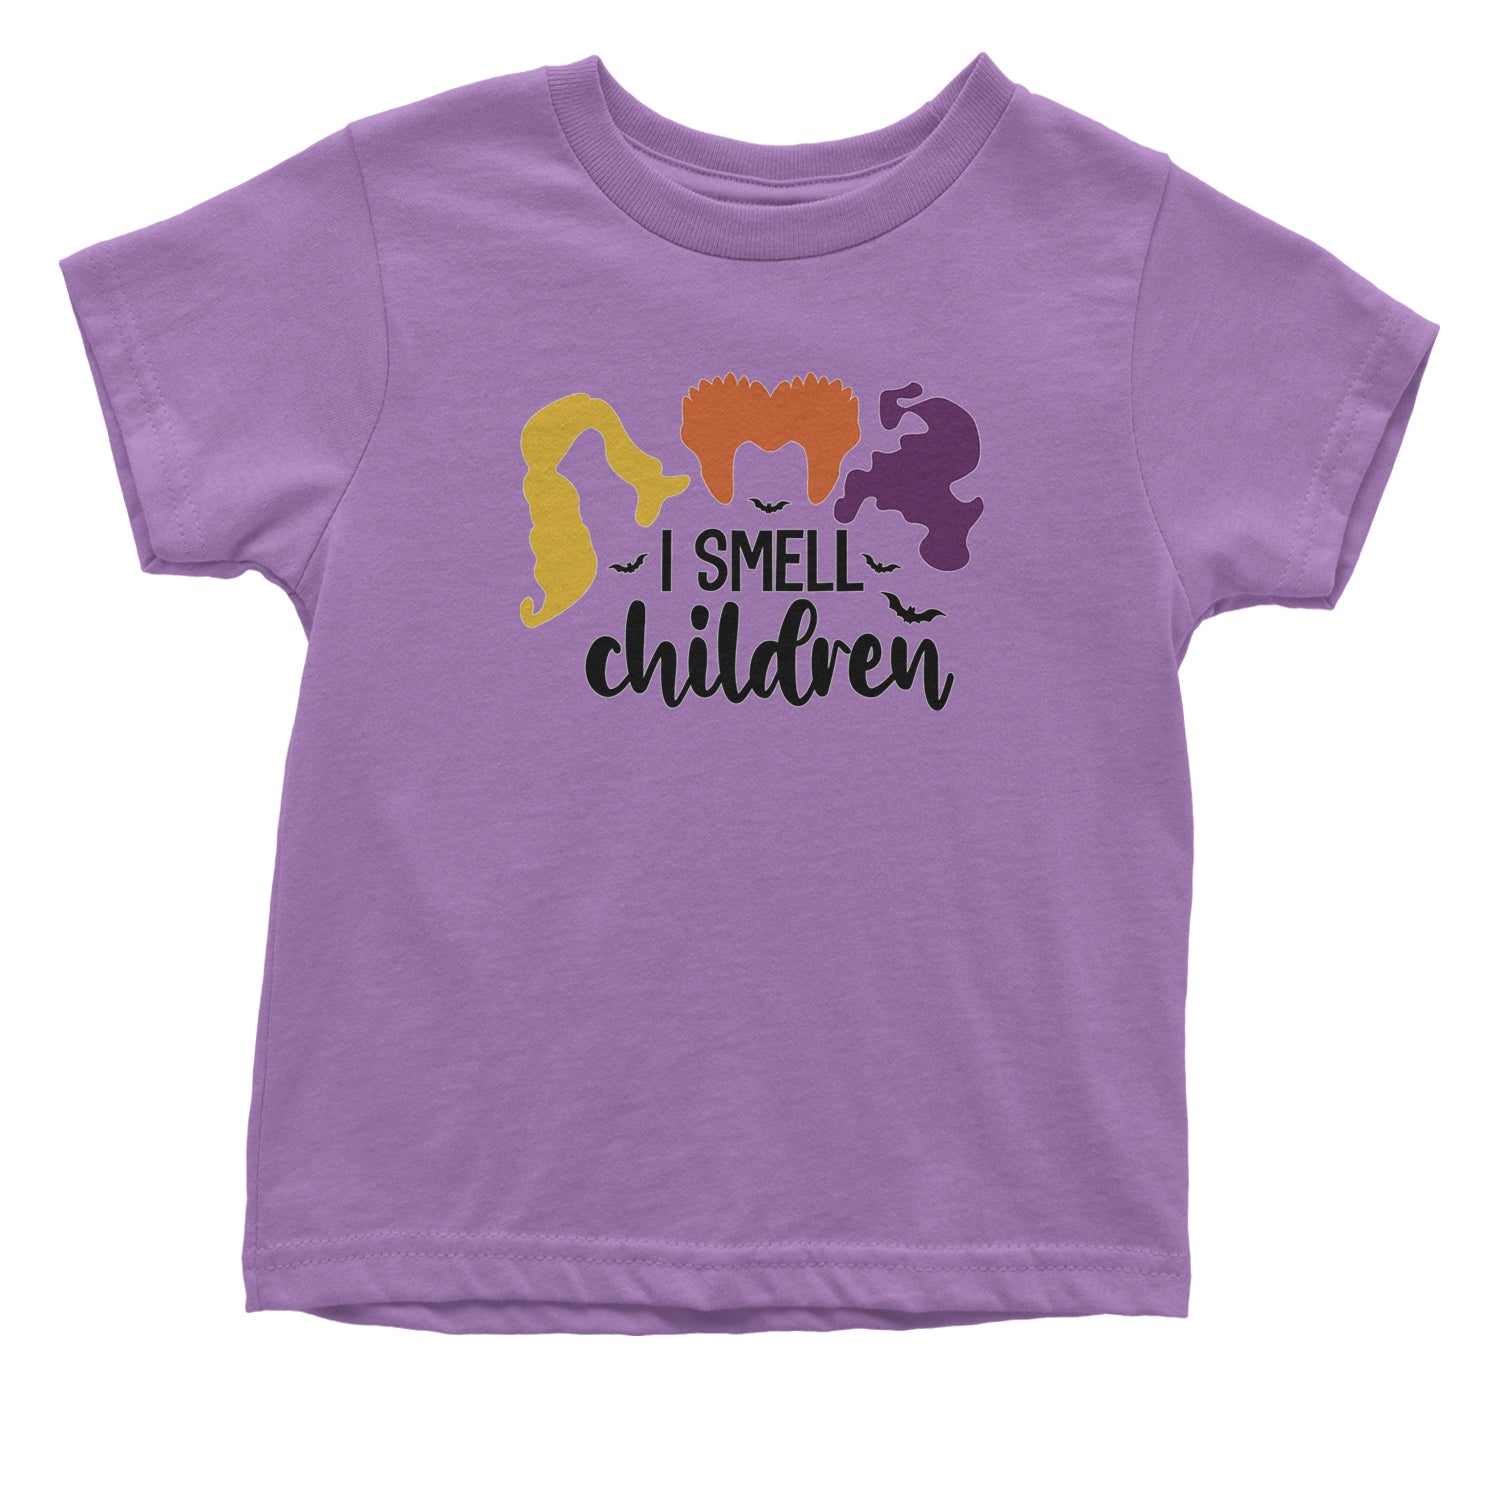 I Smell Children Hocus Pocus Infant One-Piece Romper Bodysuit and Toddler T-shirt descendants, enchanted, eve, hallows, hocus, or, pocus, sanderson, sisters, treat, trick, witches by Expression Tees